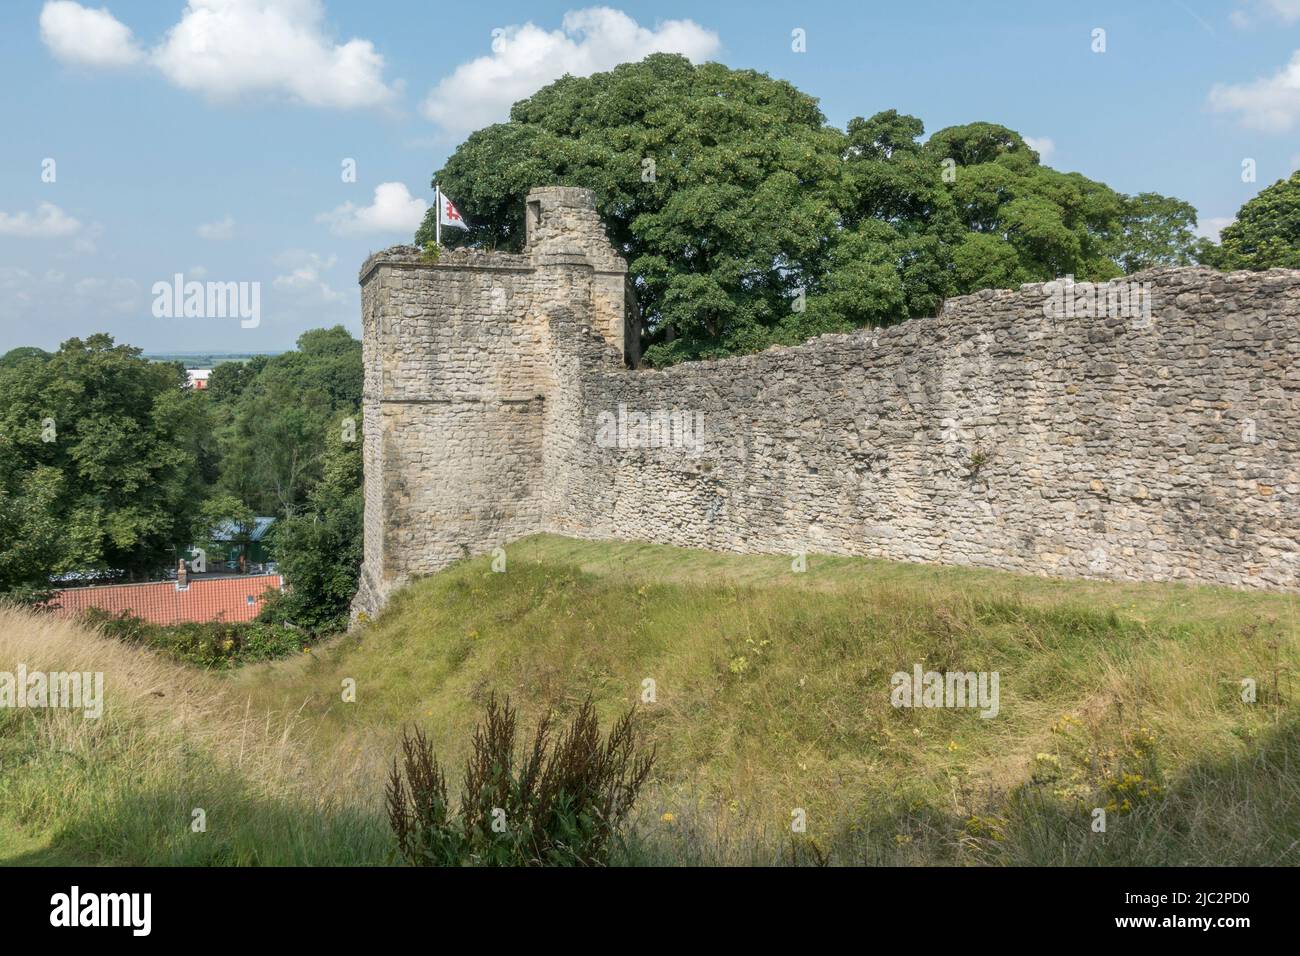 Exterior and main entrance to Pickering Castle, a motte-and-bailey fortification in Pickering, North Yorkshire, England. Stock Photo